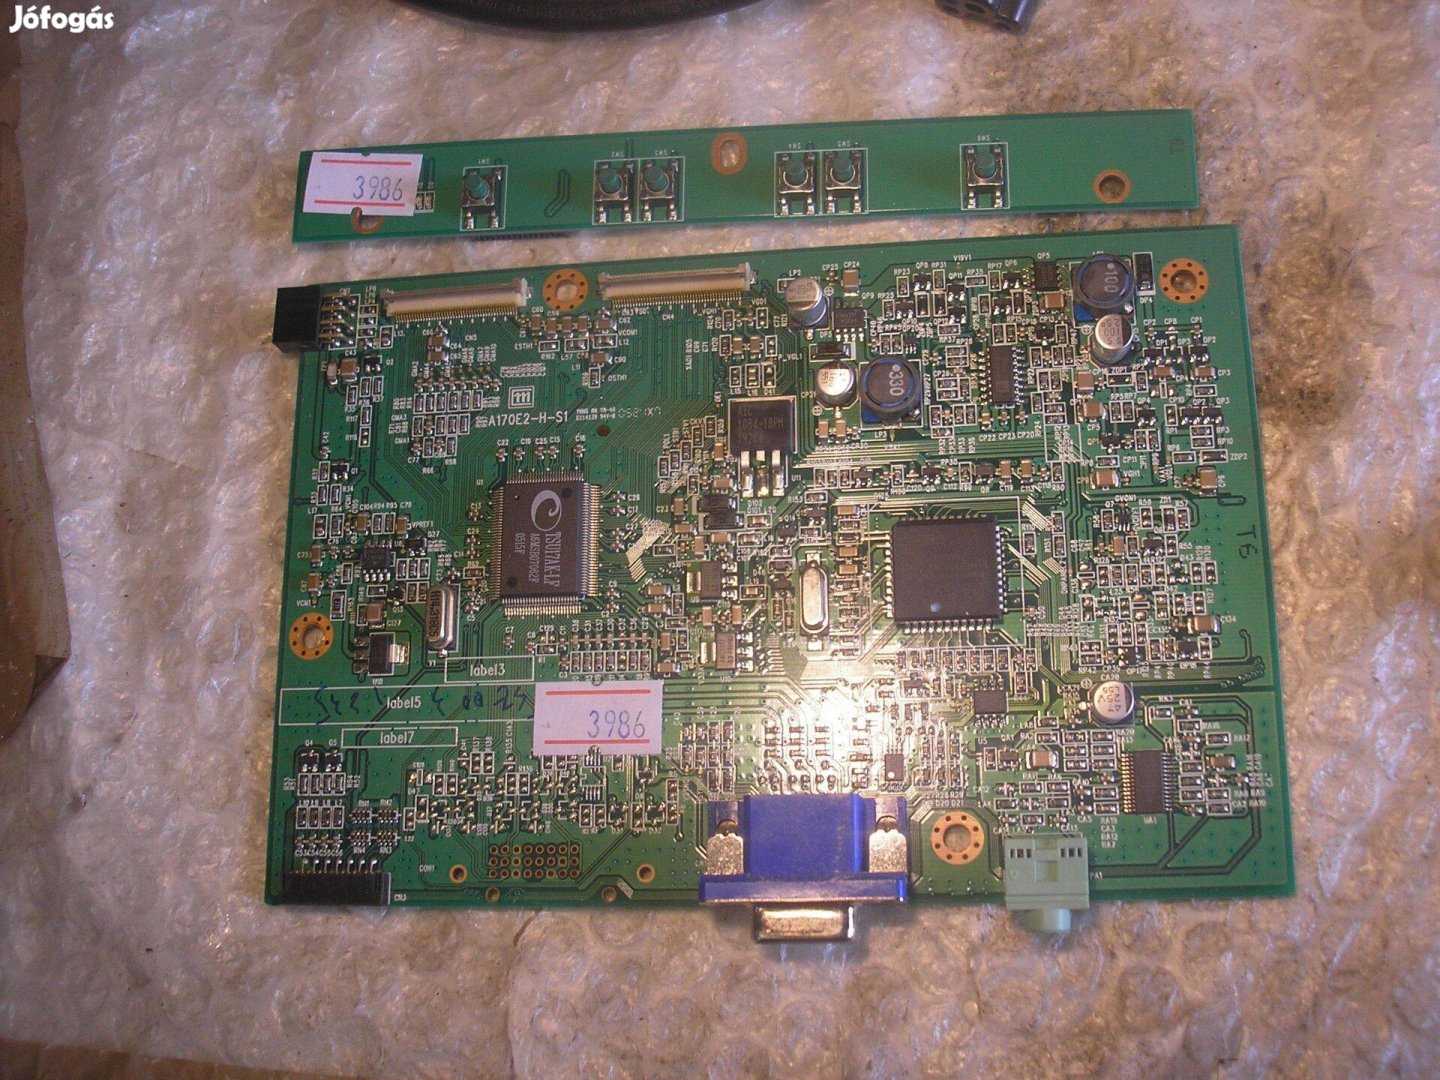 3986 Videoseven W17PS mainboard A170E2-H-S1 Acer 1714B